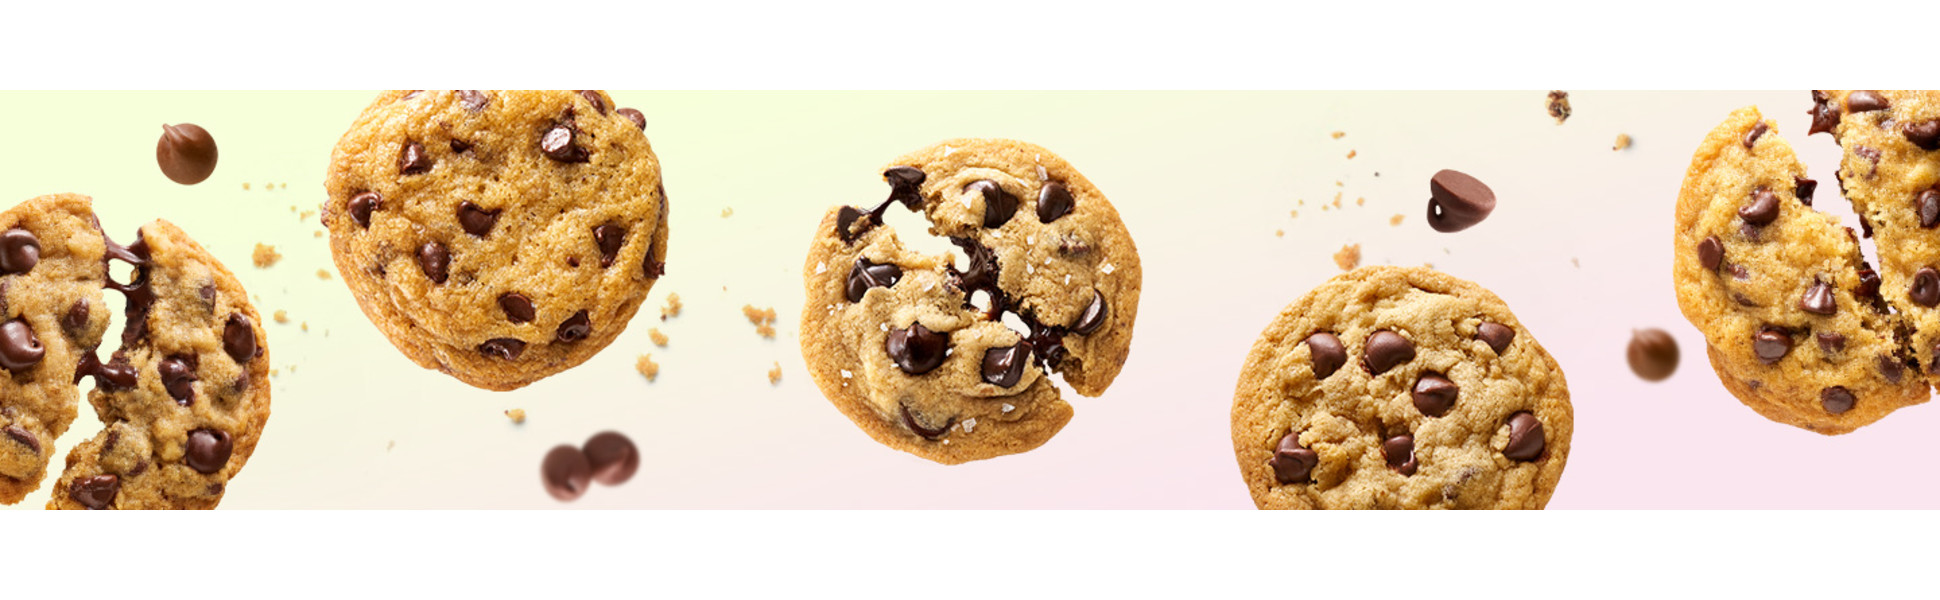 Save on Nestle Toll House Edible Cookie Dough Chocolate Chip Order Online  Delivery